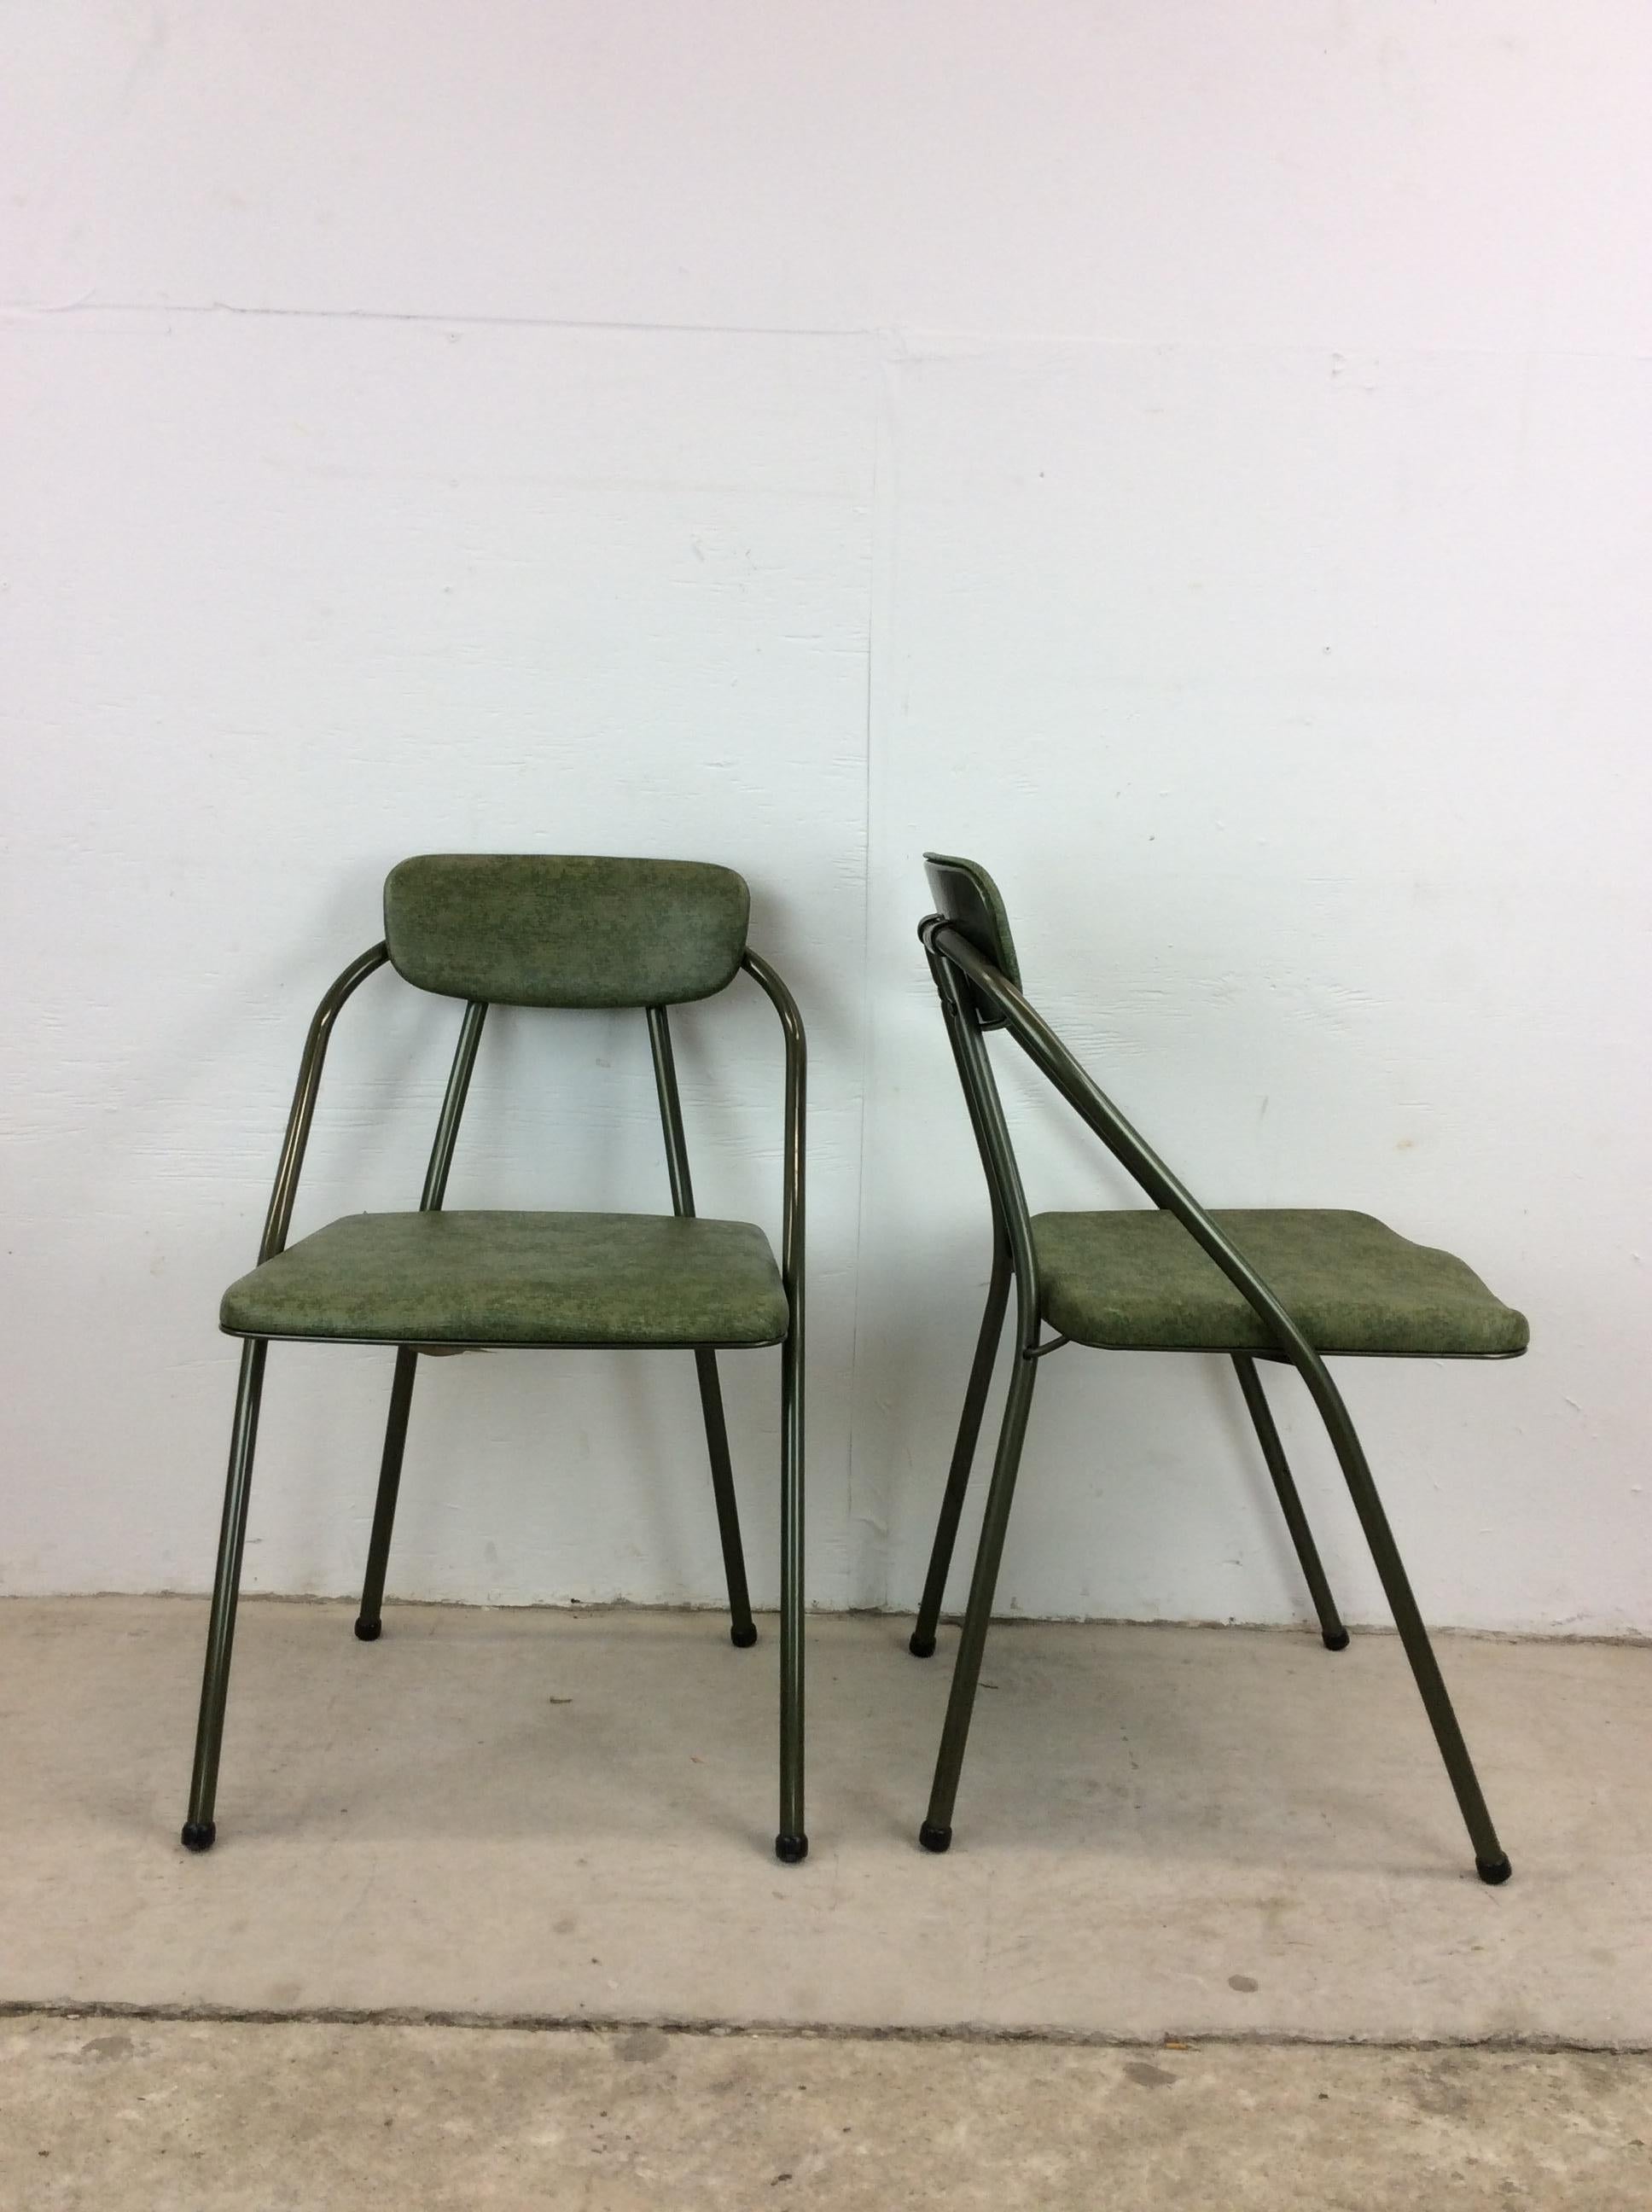 American Mid Century Modern Folding Chairs with Green Vinyl by Cosco For Sale